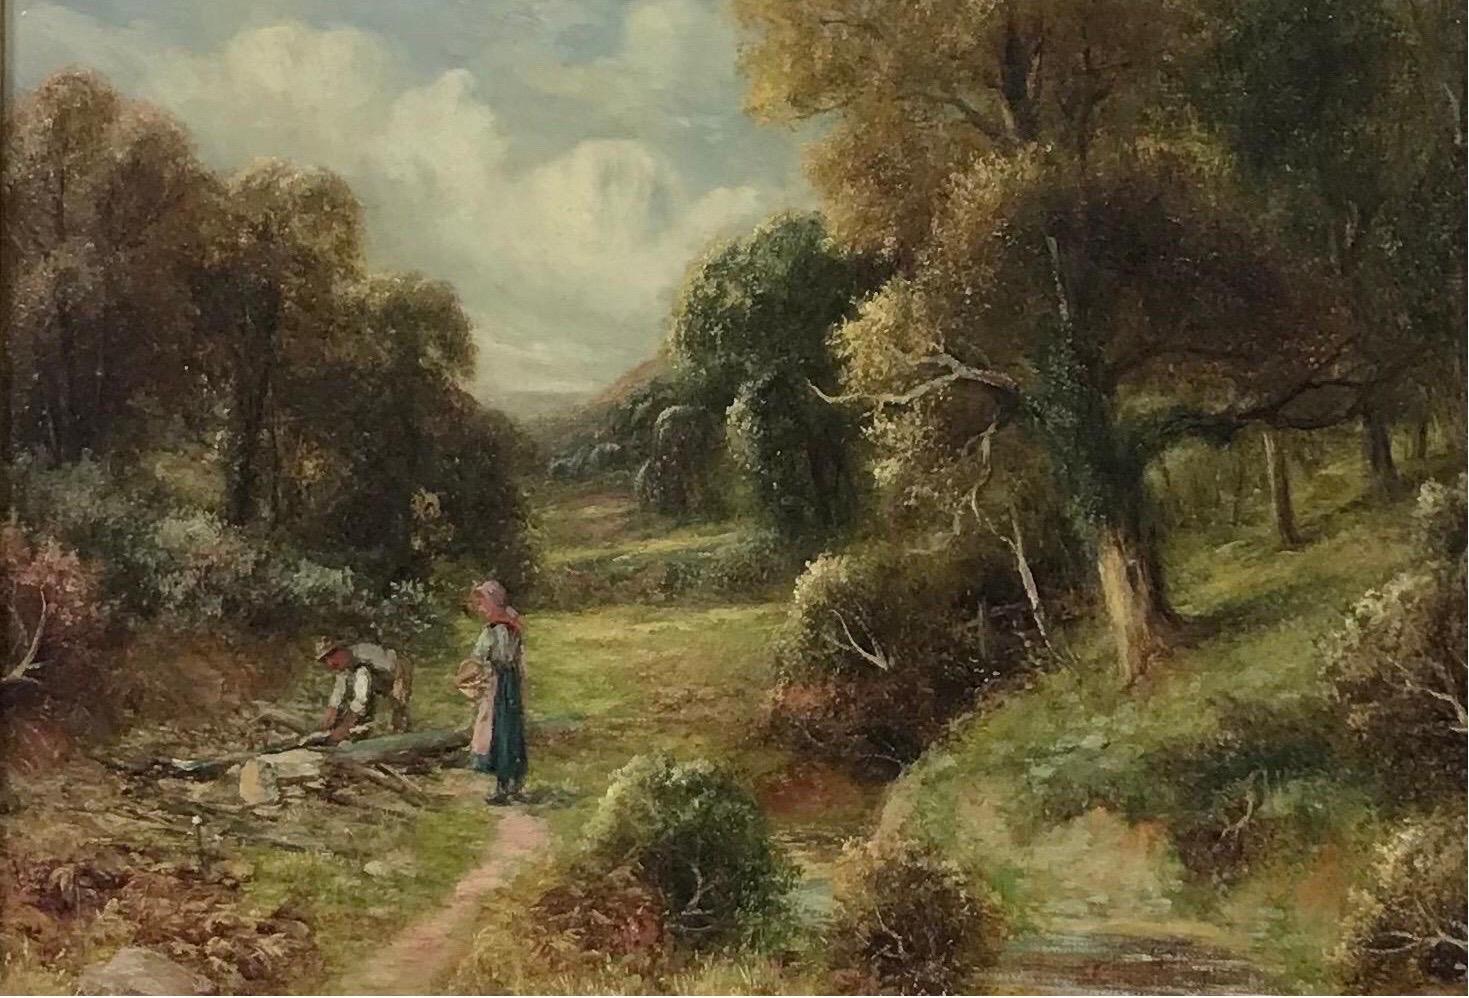 ROBERT JOHN HAMMOND (Exhibited 1882 - 1911) Figurative Painting - Fine Victorian Oil Painting Children Collecting Wood in Rural Lane, signed 